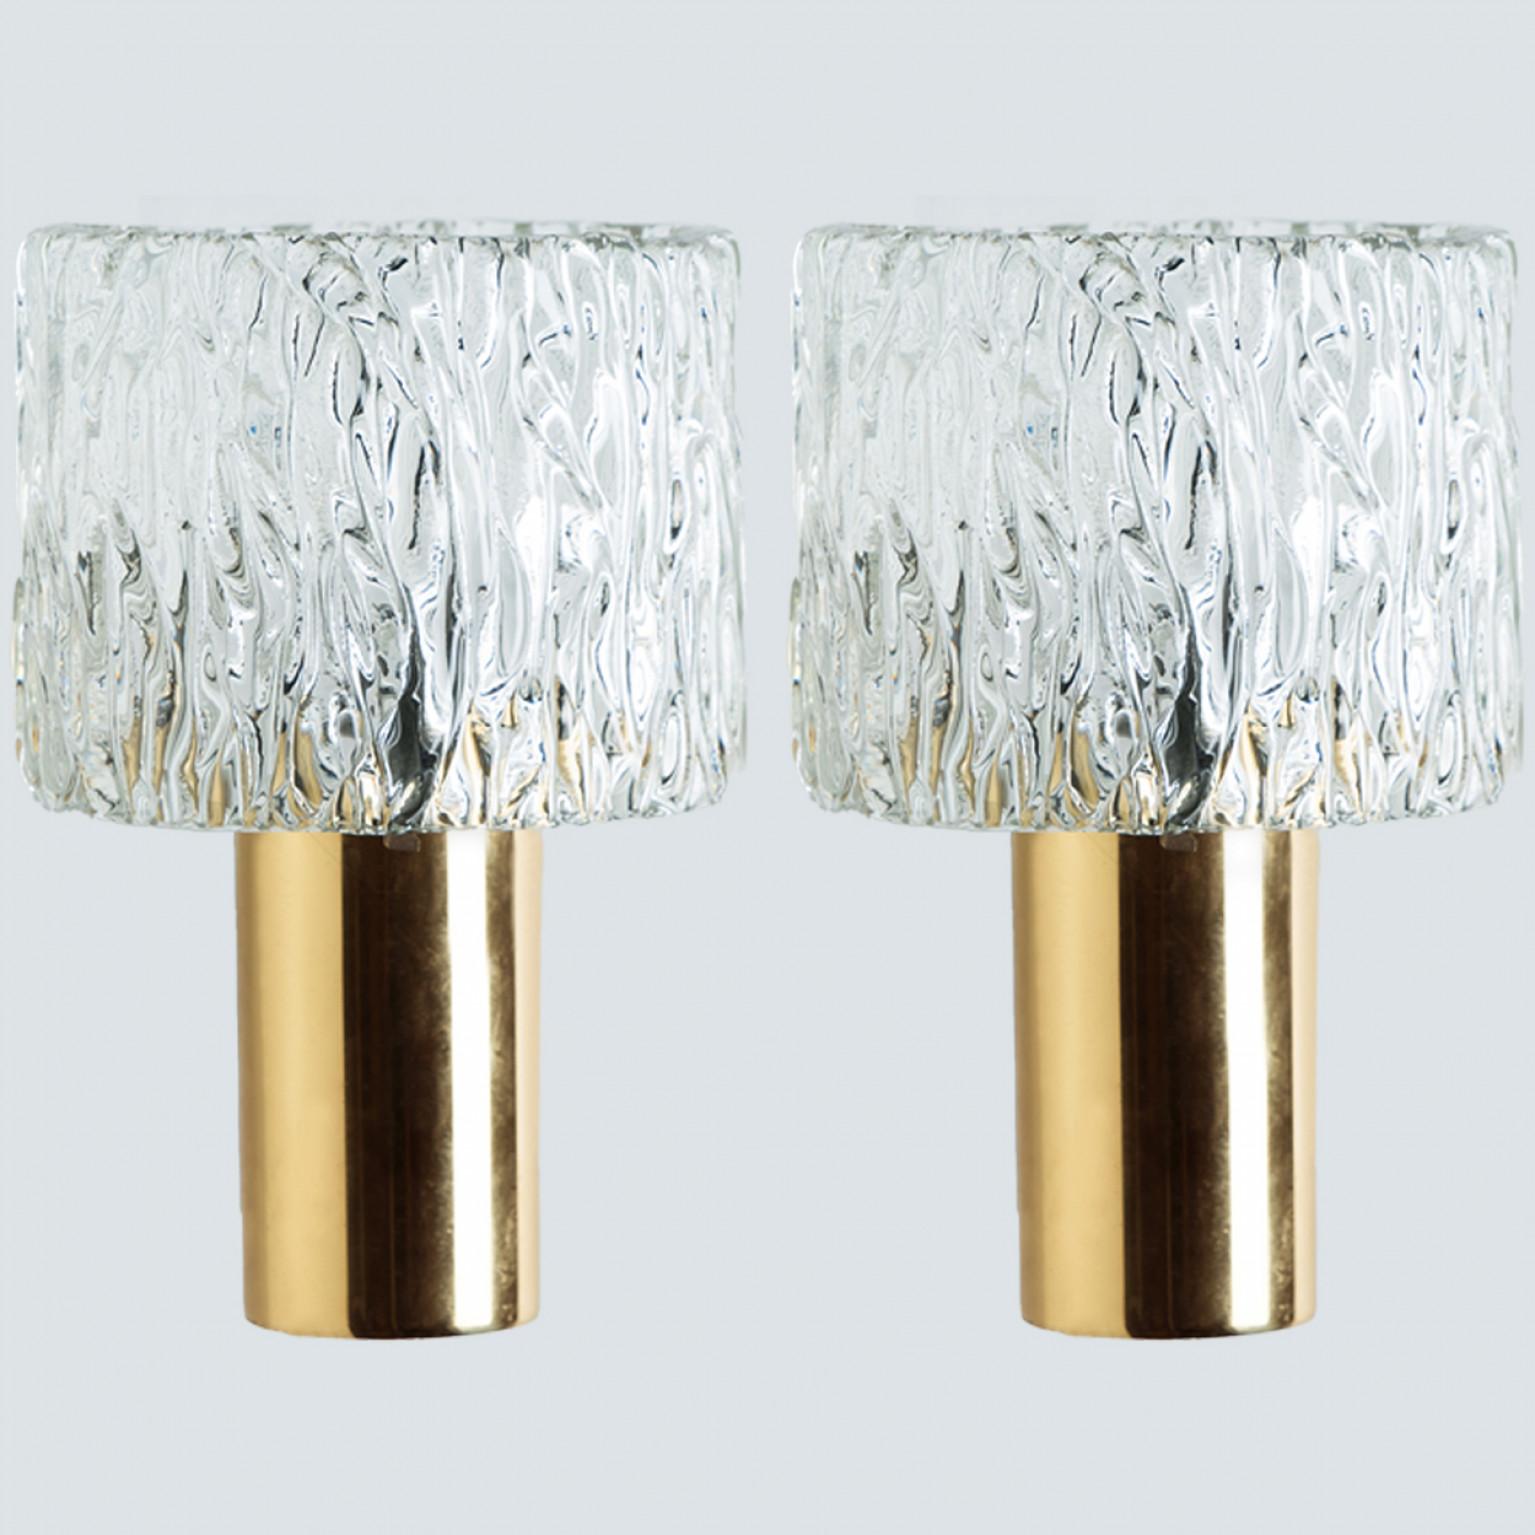 1 of the 2 Pairs of Glass Torch Wall Sconces by Fagerlund, 1960 For Sale 5